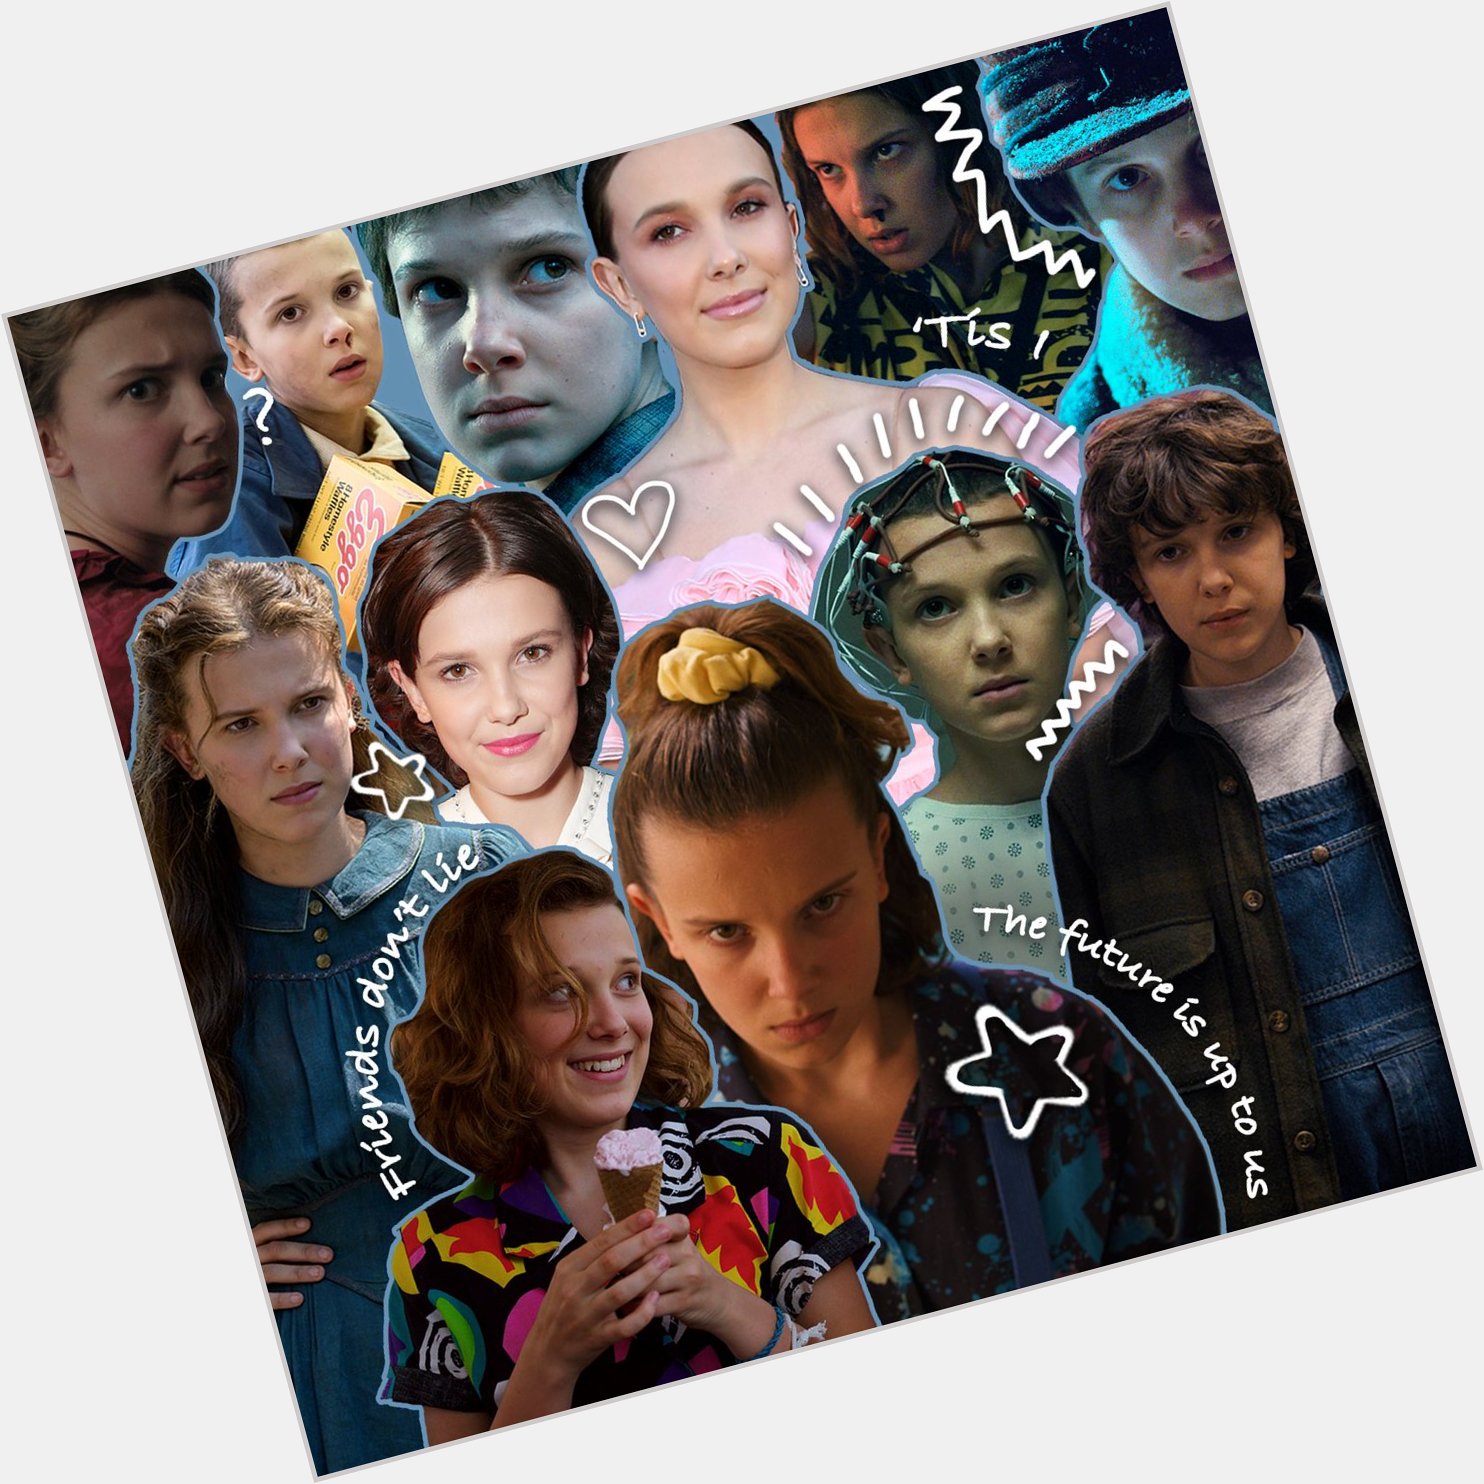 Declaring today a national holiday. Happy birthday, Millie Bobby Brown! 